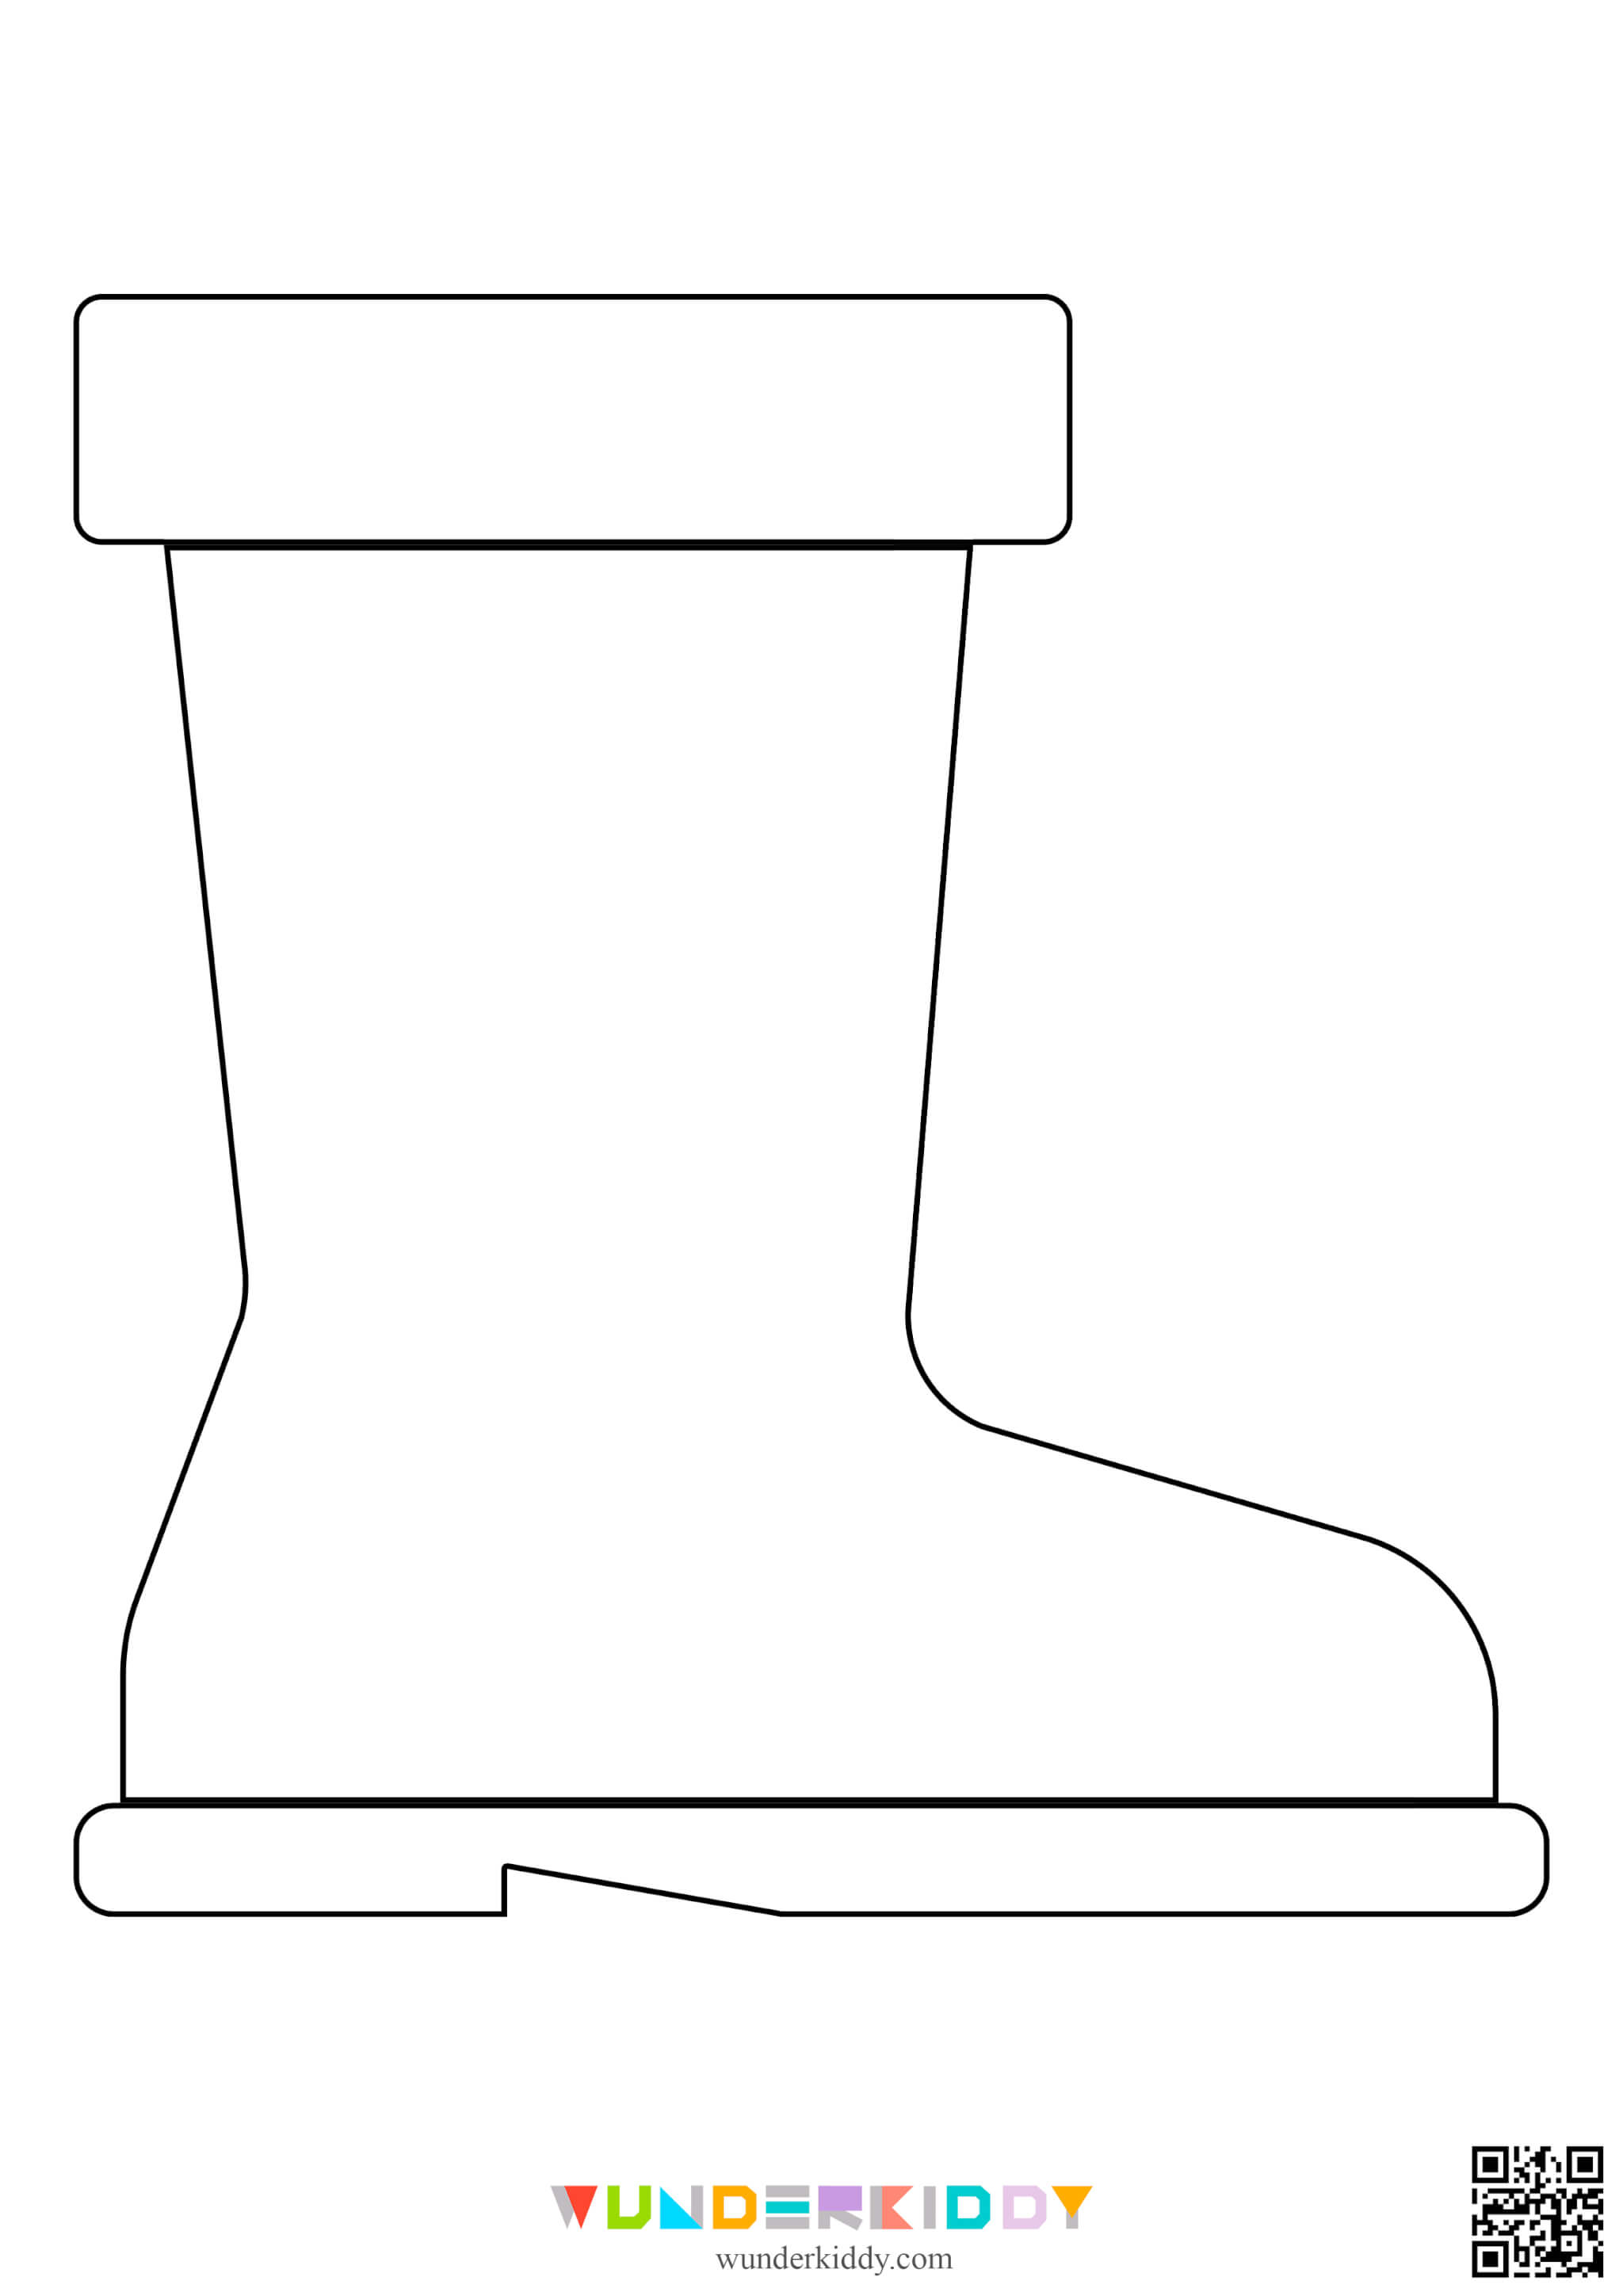 Printable rain boots pattern template for craft ideas